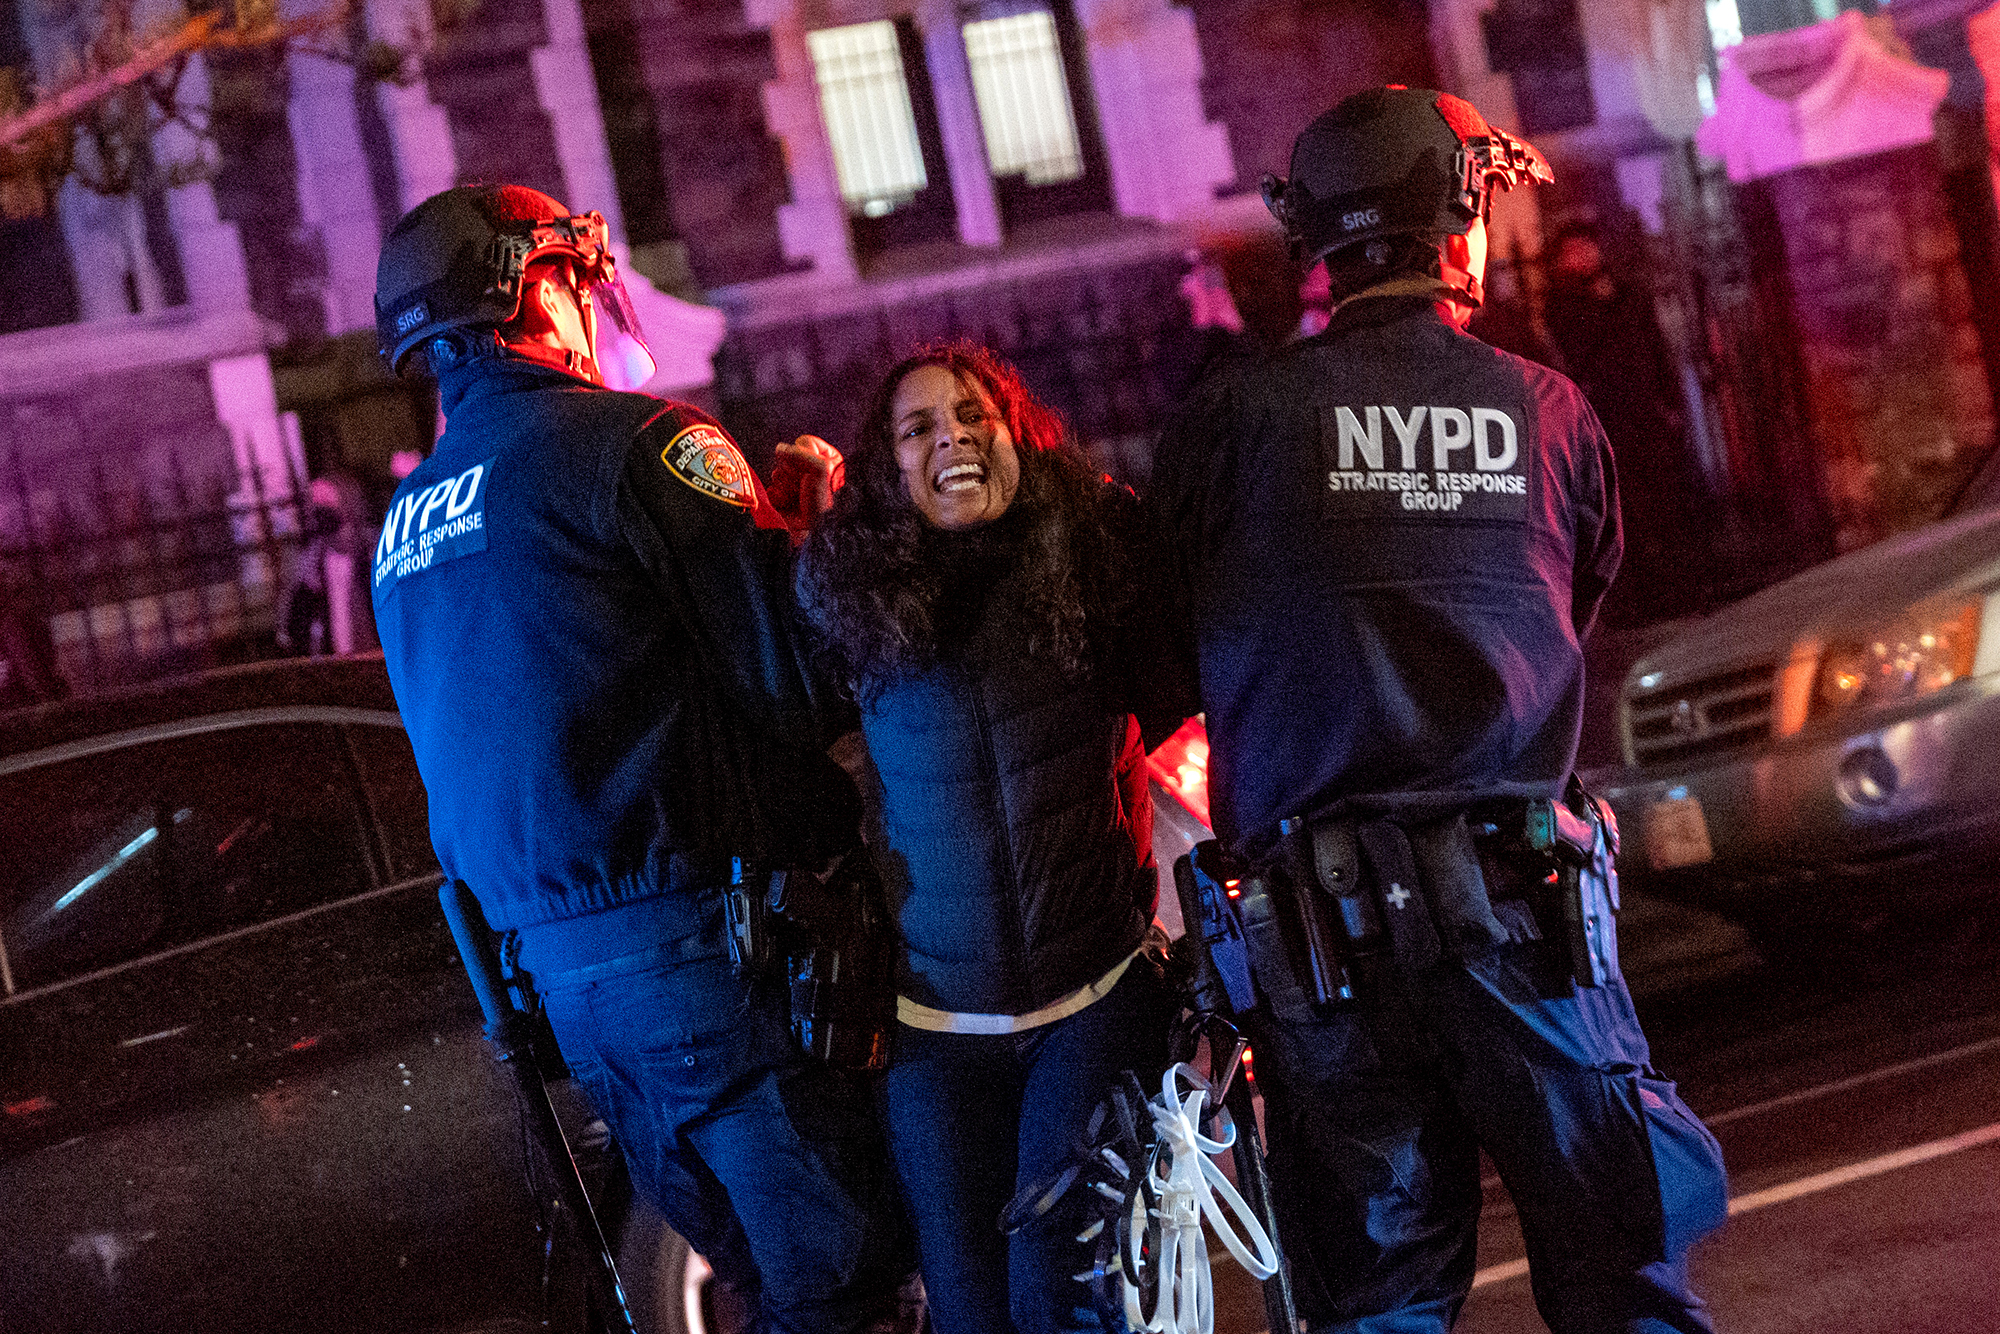 Police arrest protesters during pro-Palestinian demonstrations at The City College Of New York (CUNY) as the NYPD cracks down on protest camps at both Columbia University and CCNY on April 30, in New York City. 